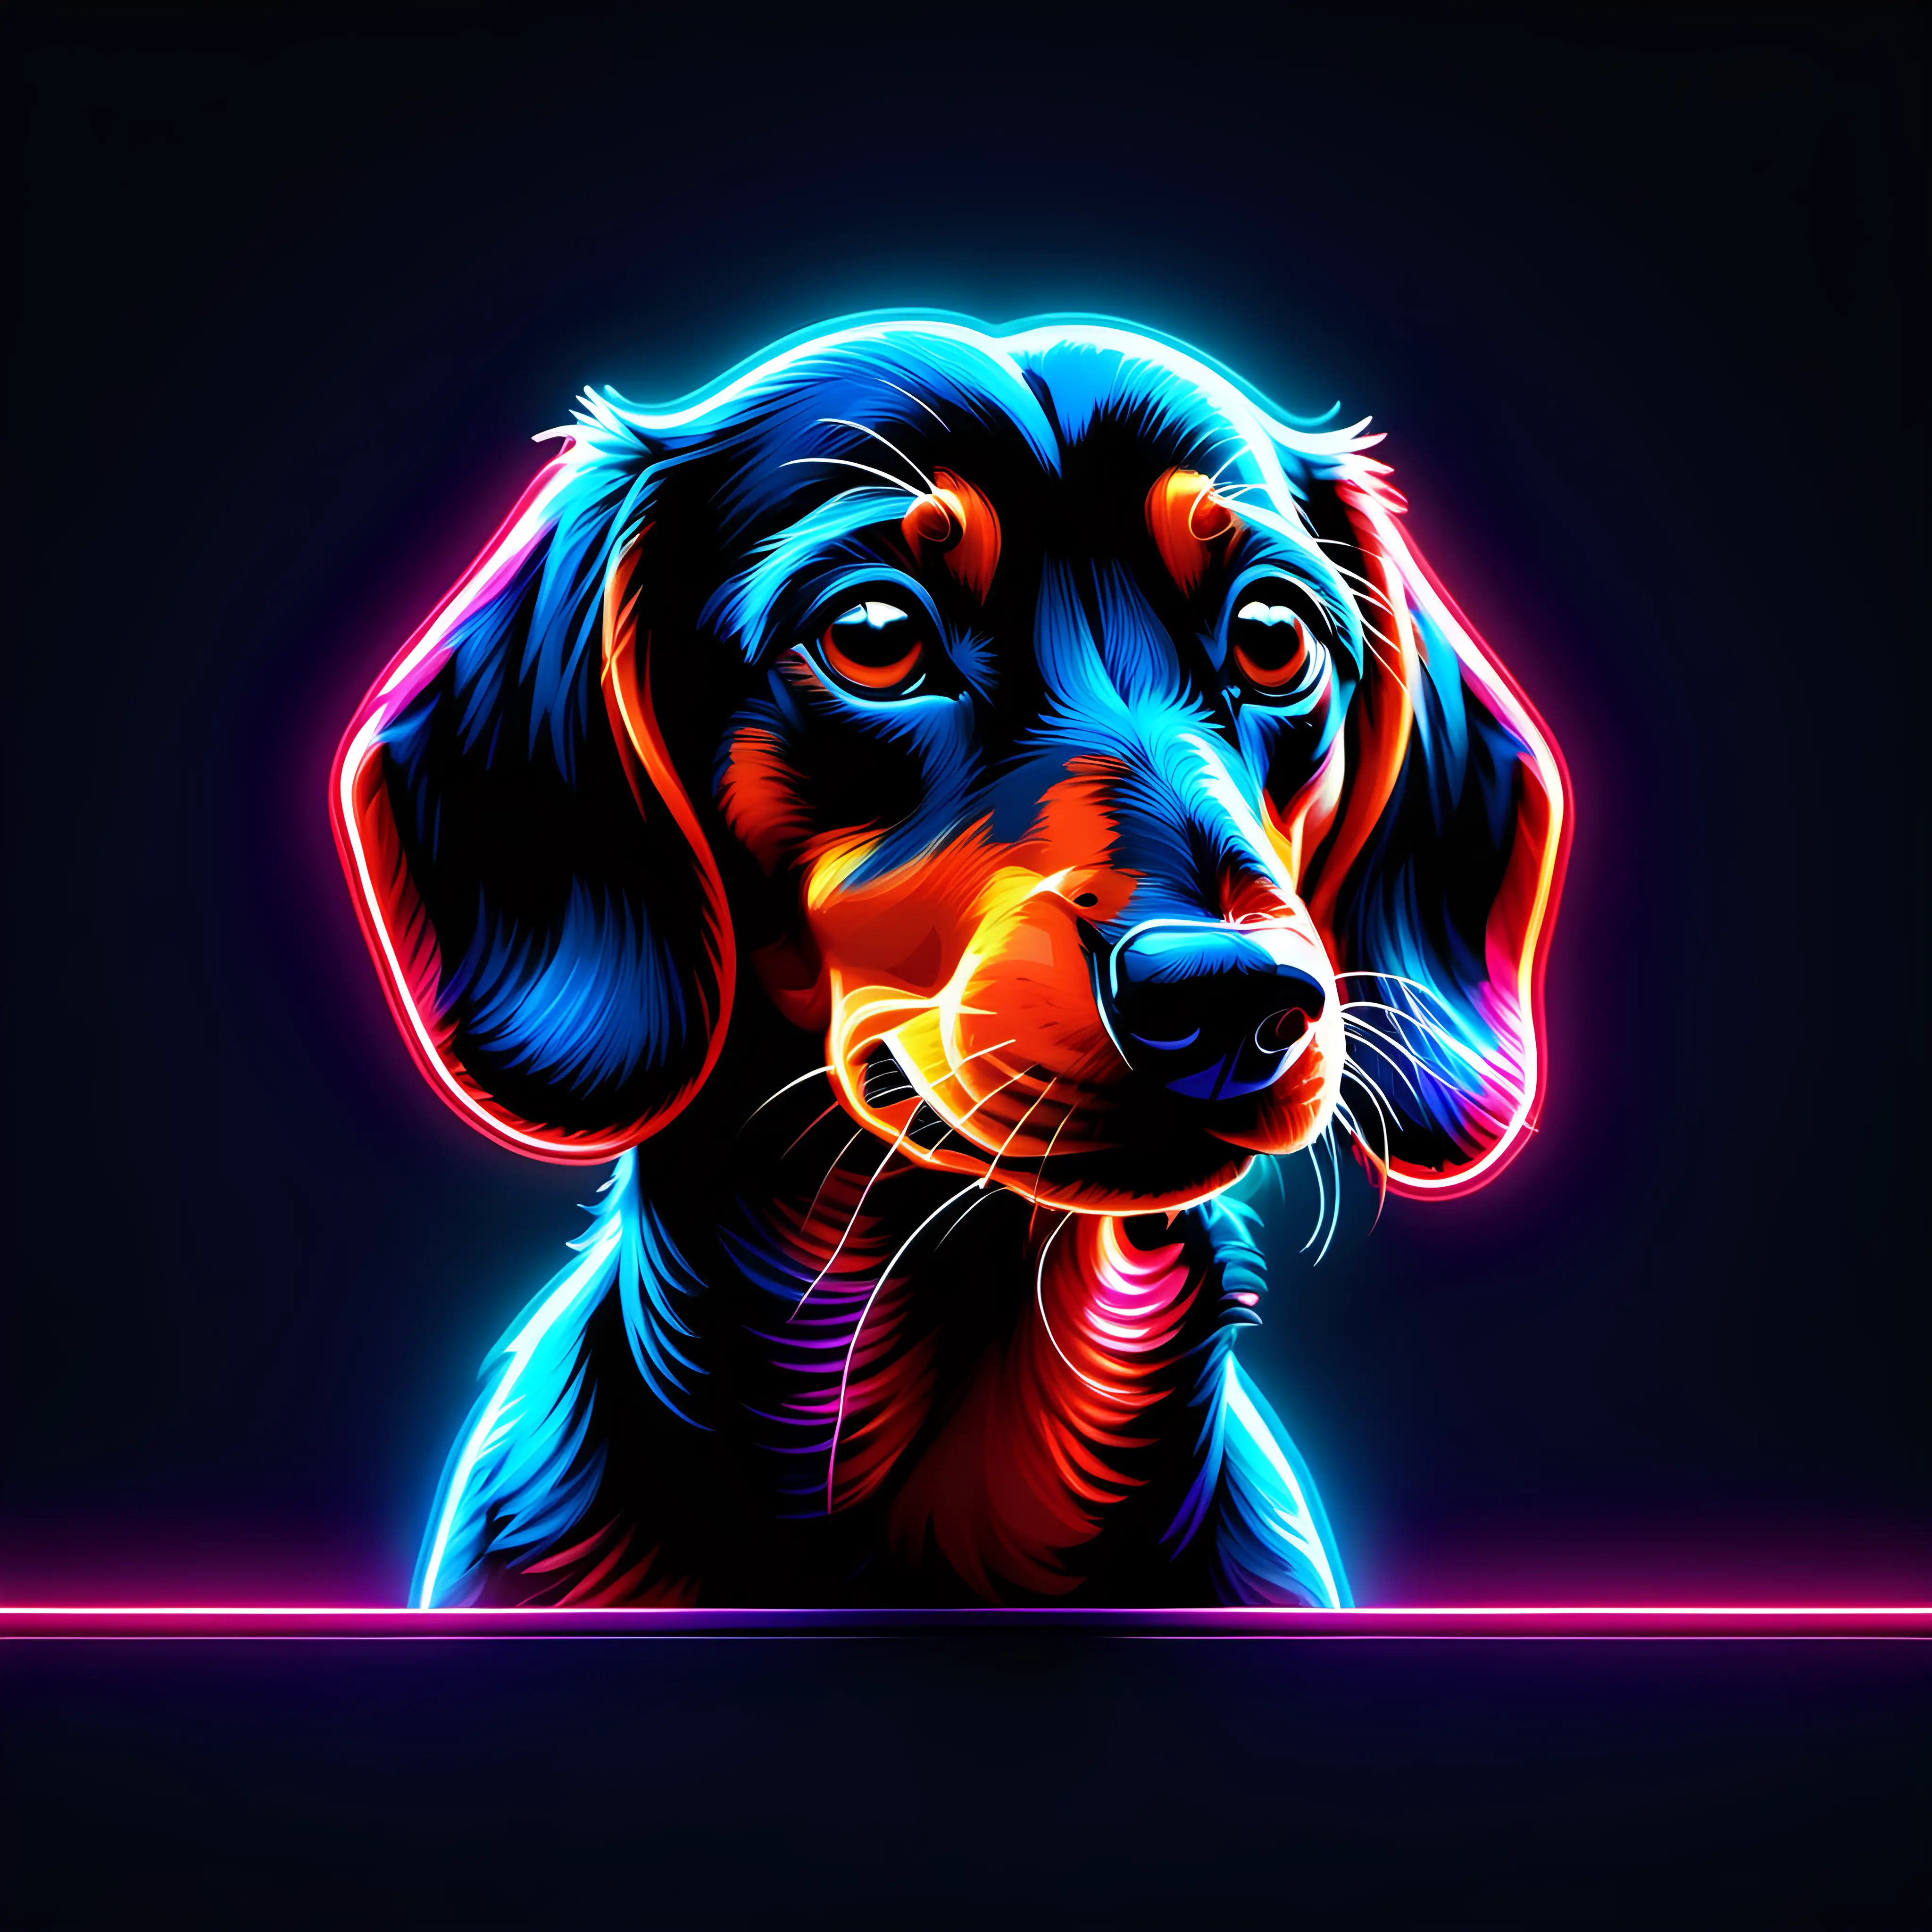 Vibrant Neon Abstract Art Featuring a Playful Dachshund in 4K